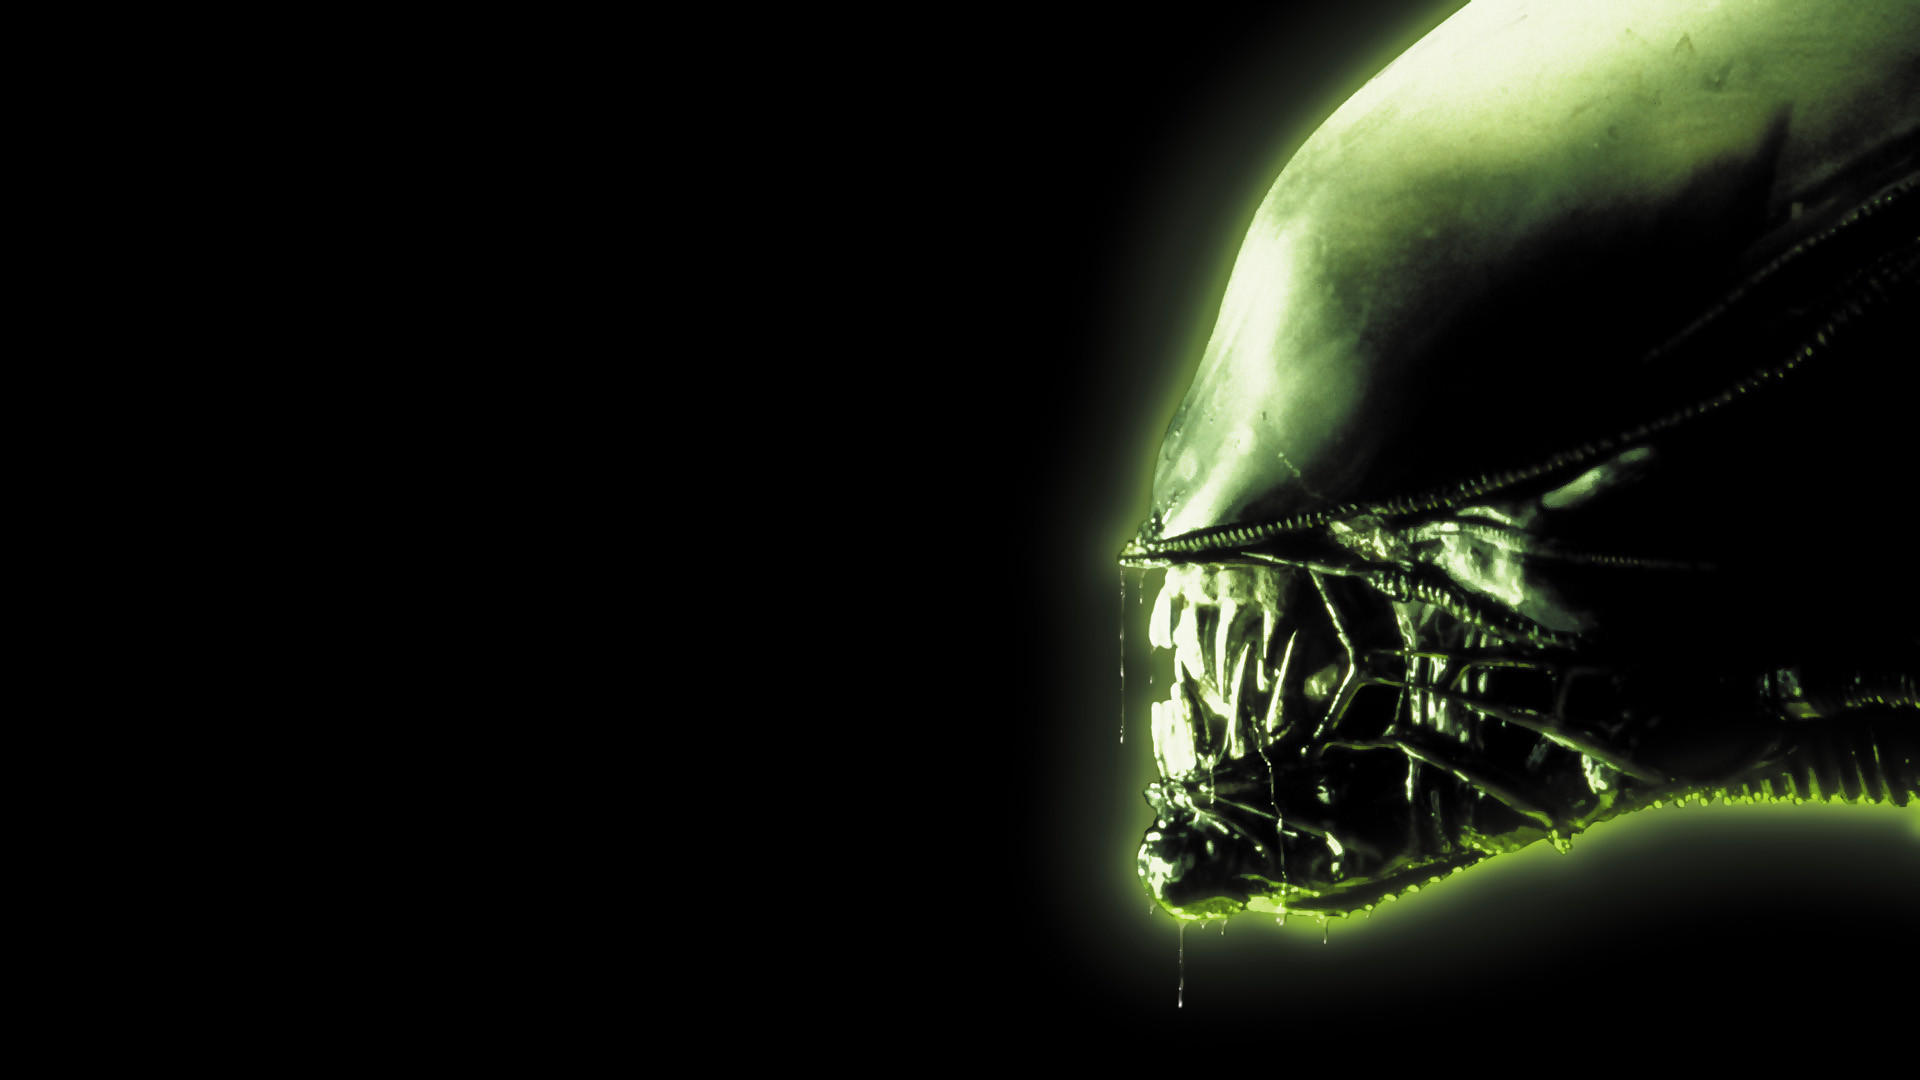 Alien Image HD Wallpaper And Background Photos